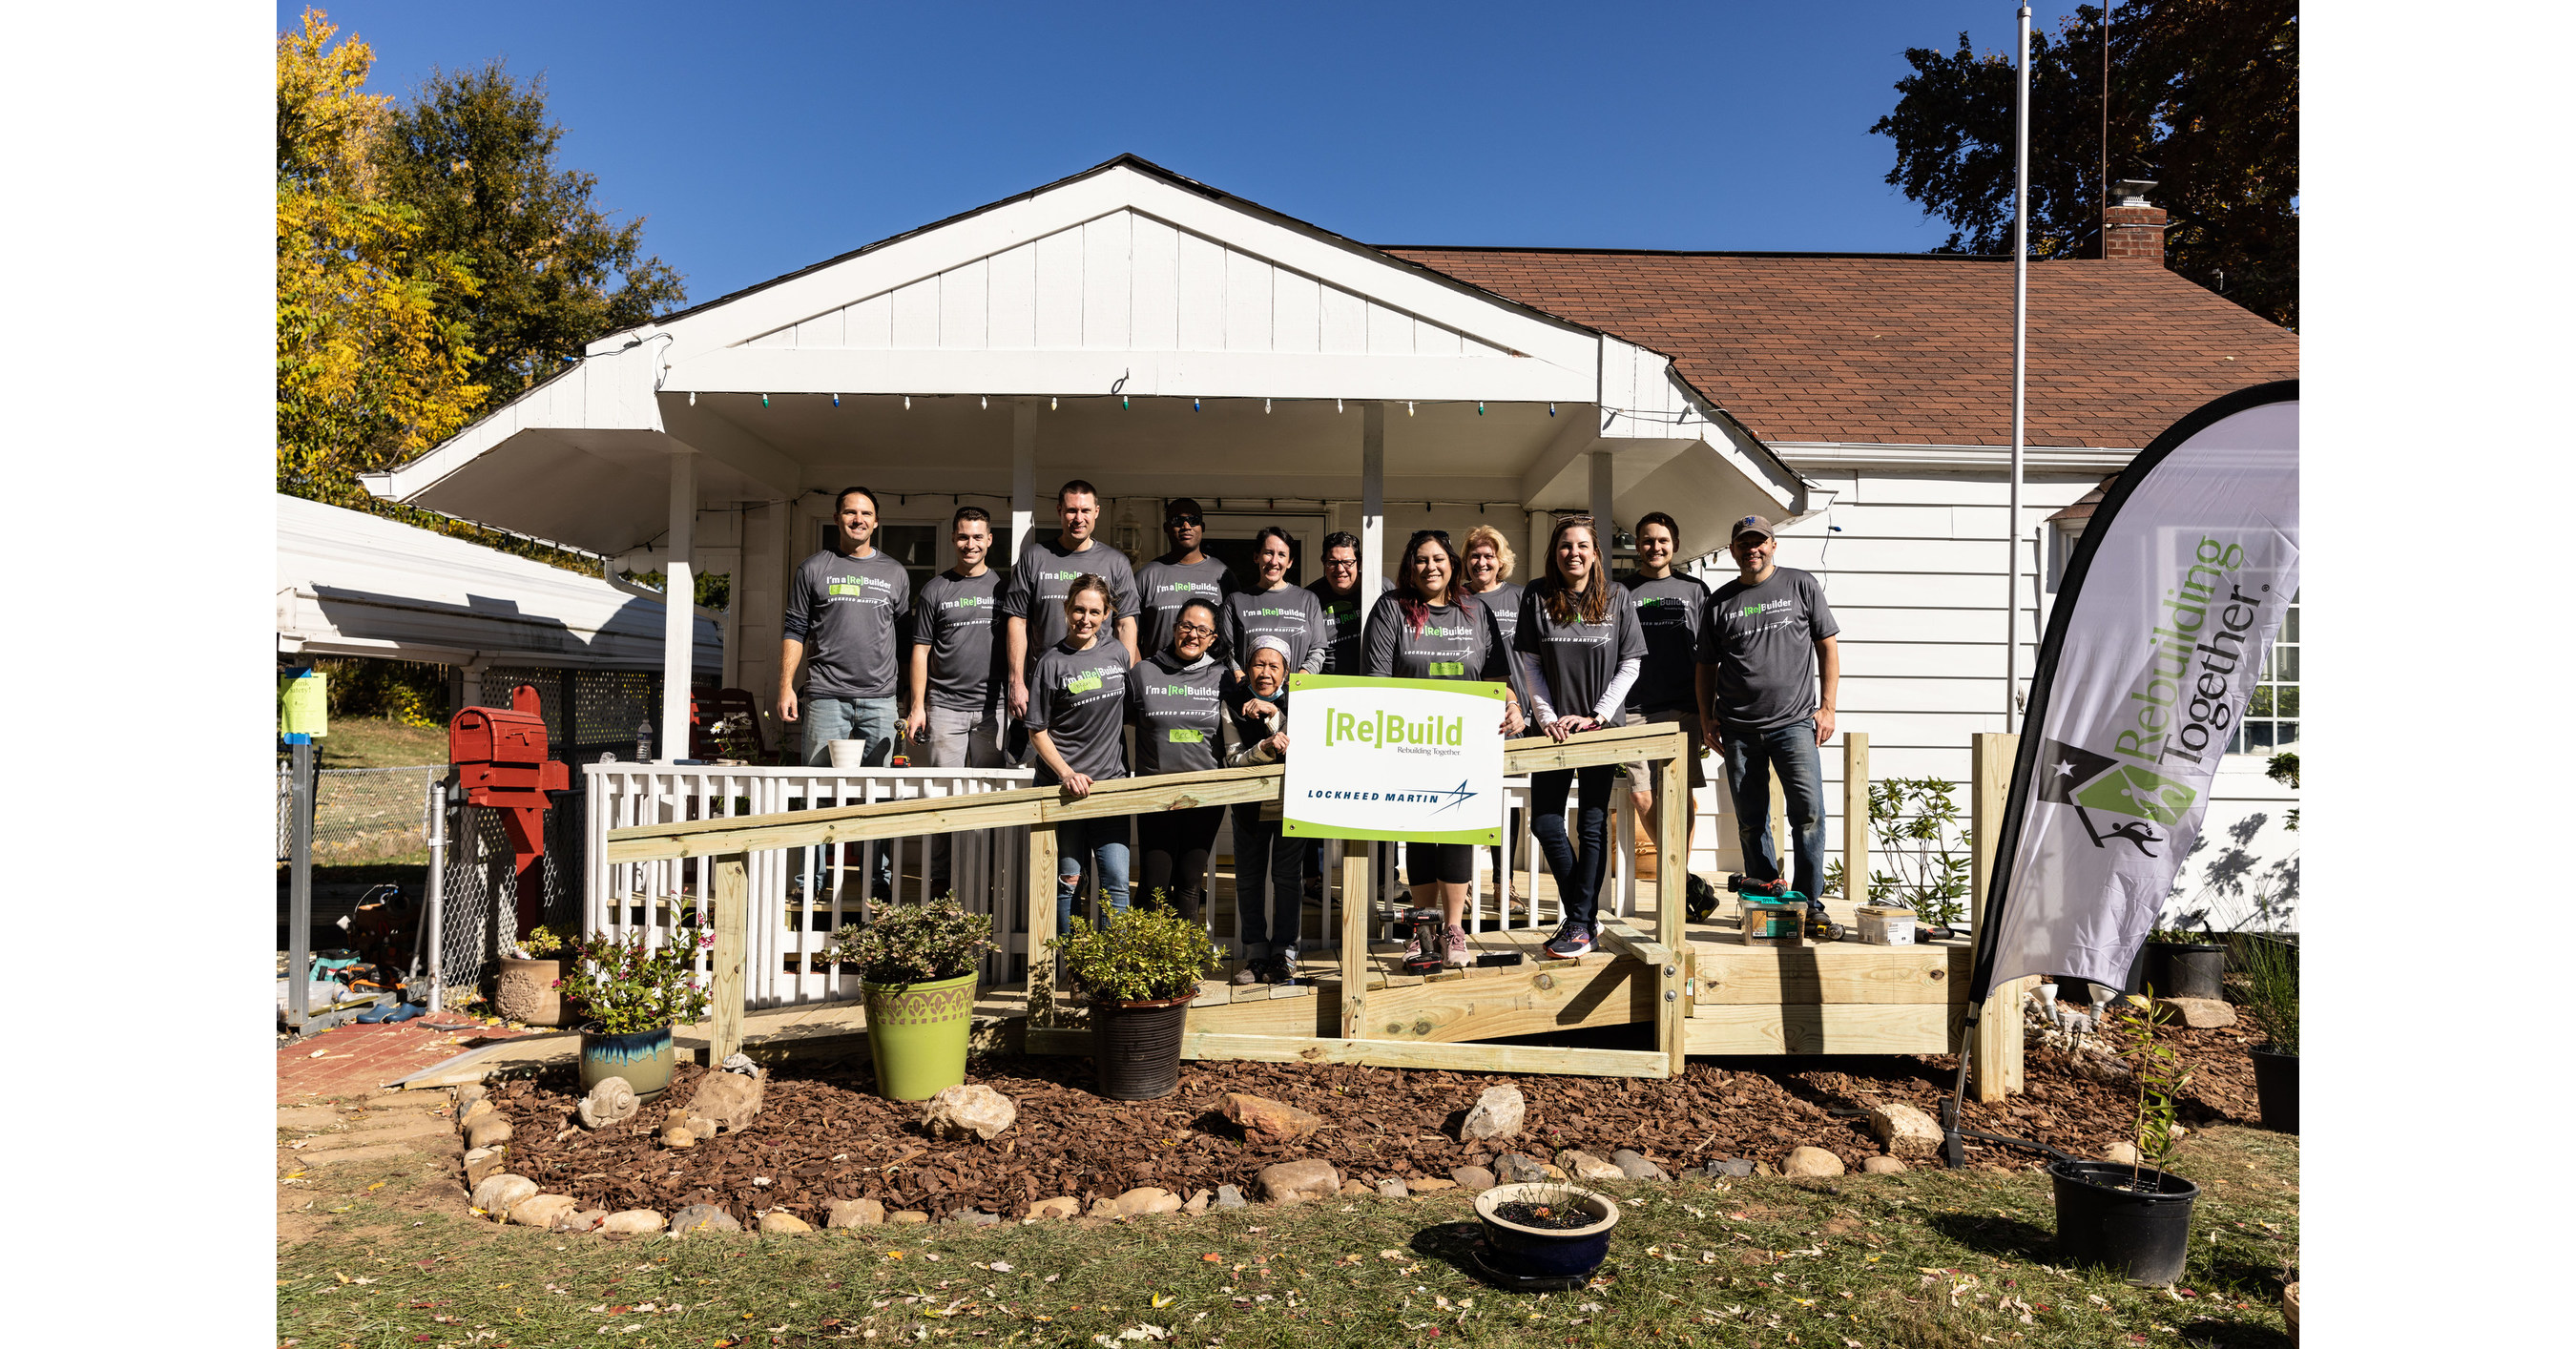 Rebuilding Together, Lockheed Martin Partner to Provide Essential Home Repairs, Accessibility Modifications for Veterans